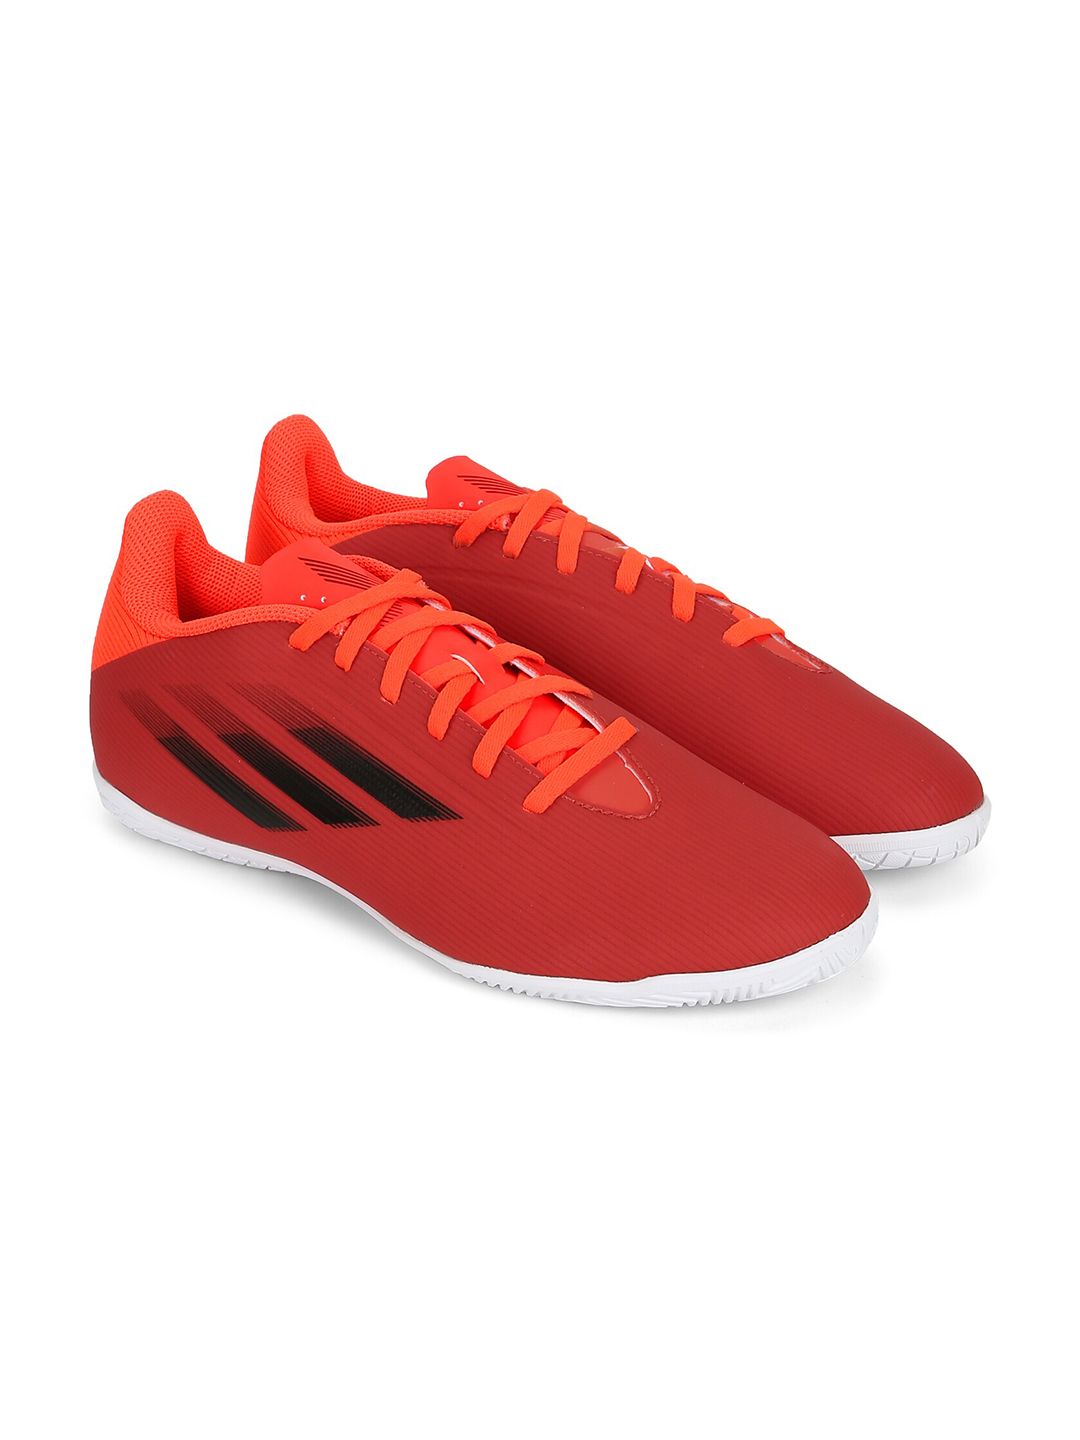 ADIDAS Unisex Red Football Shoes Price in India